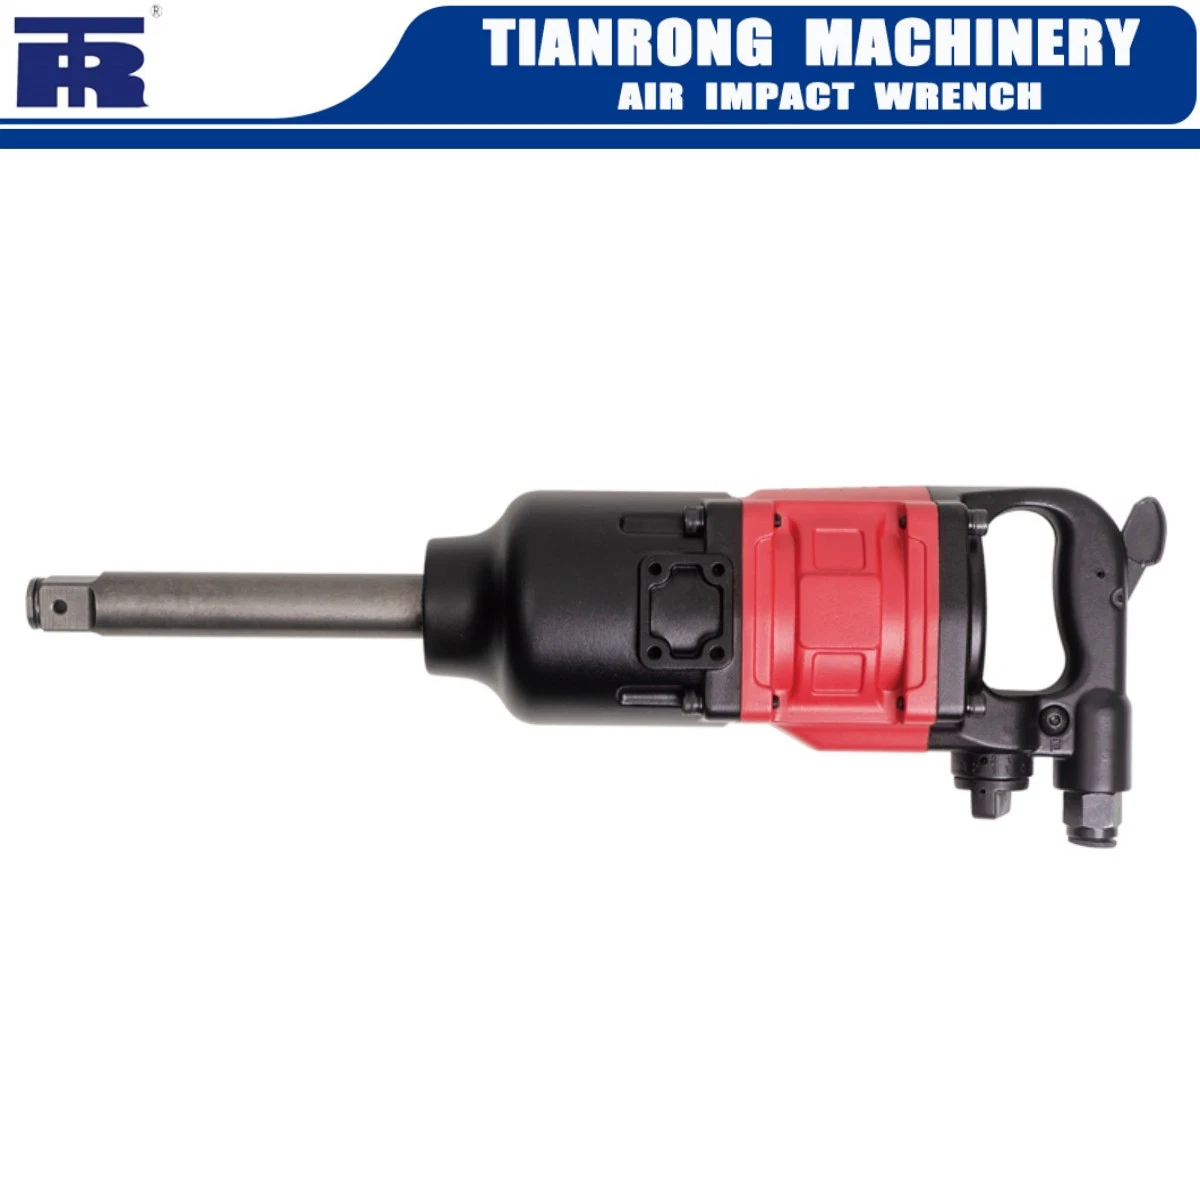 Power Tool, 1 Inch Pneumatic Tool, High Torque, Hardware Tool, Air Impact Wrench